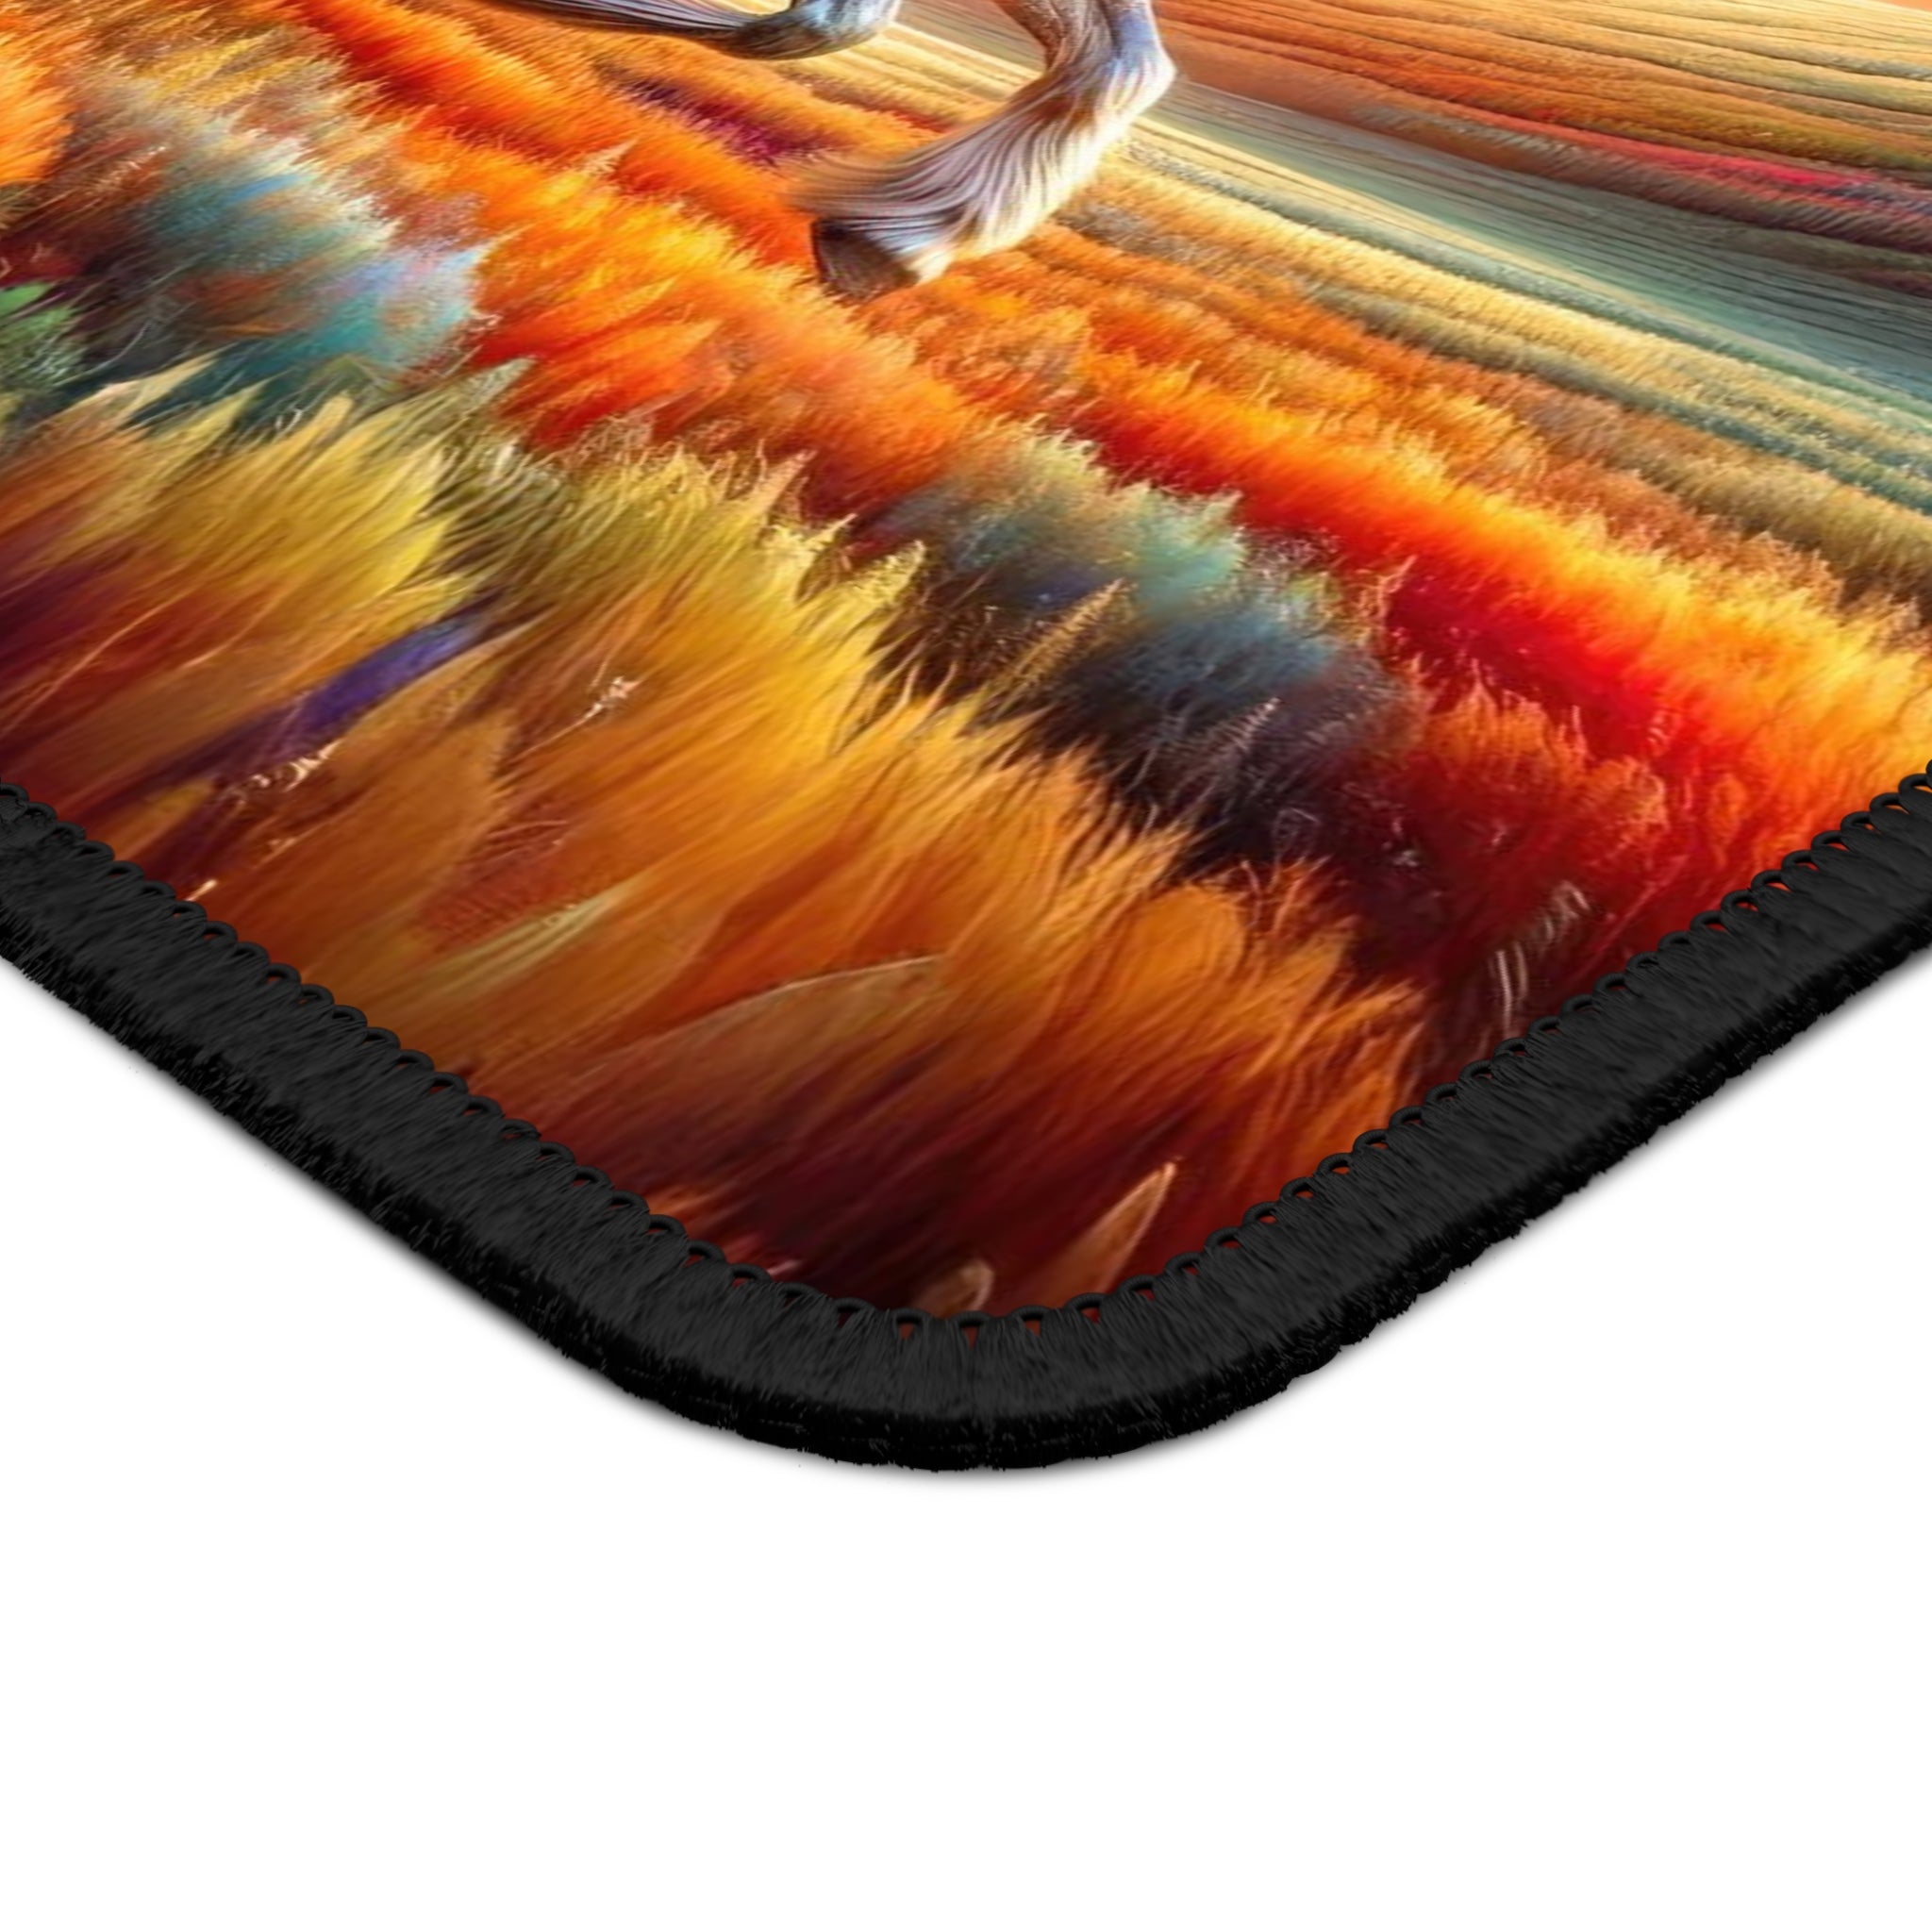 Gallop into the Vortex Gaming Mouse Pad